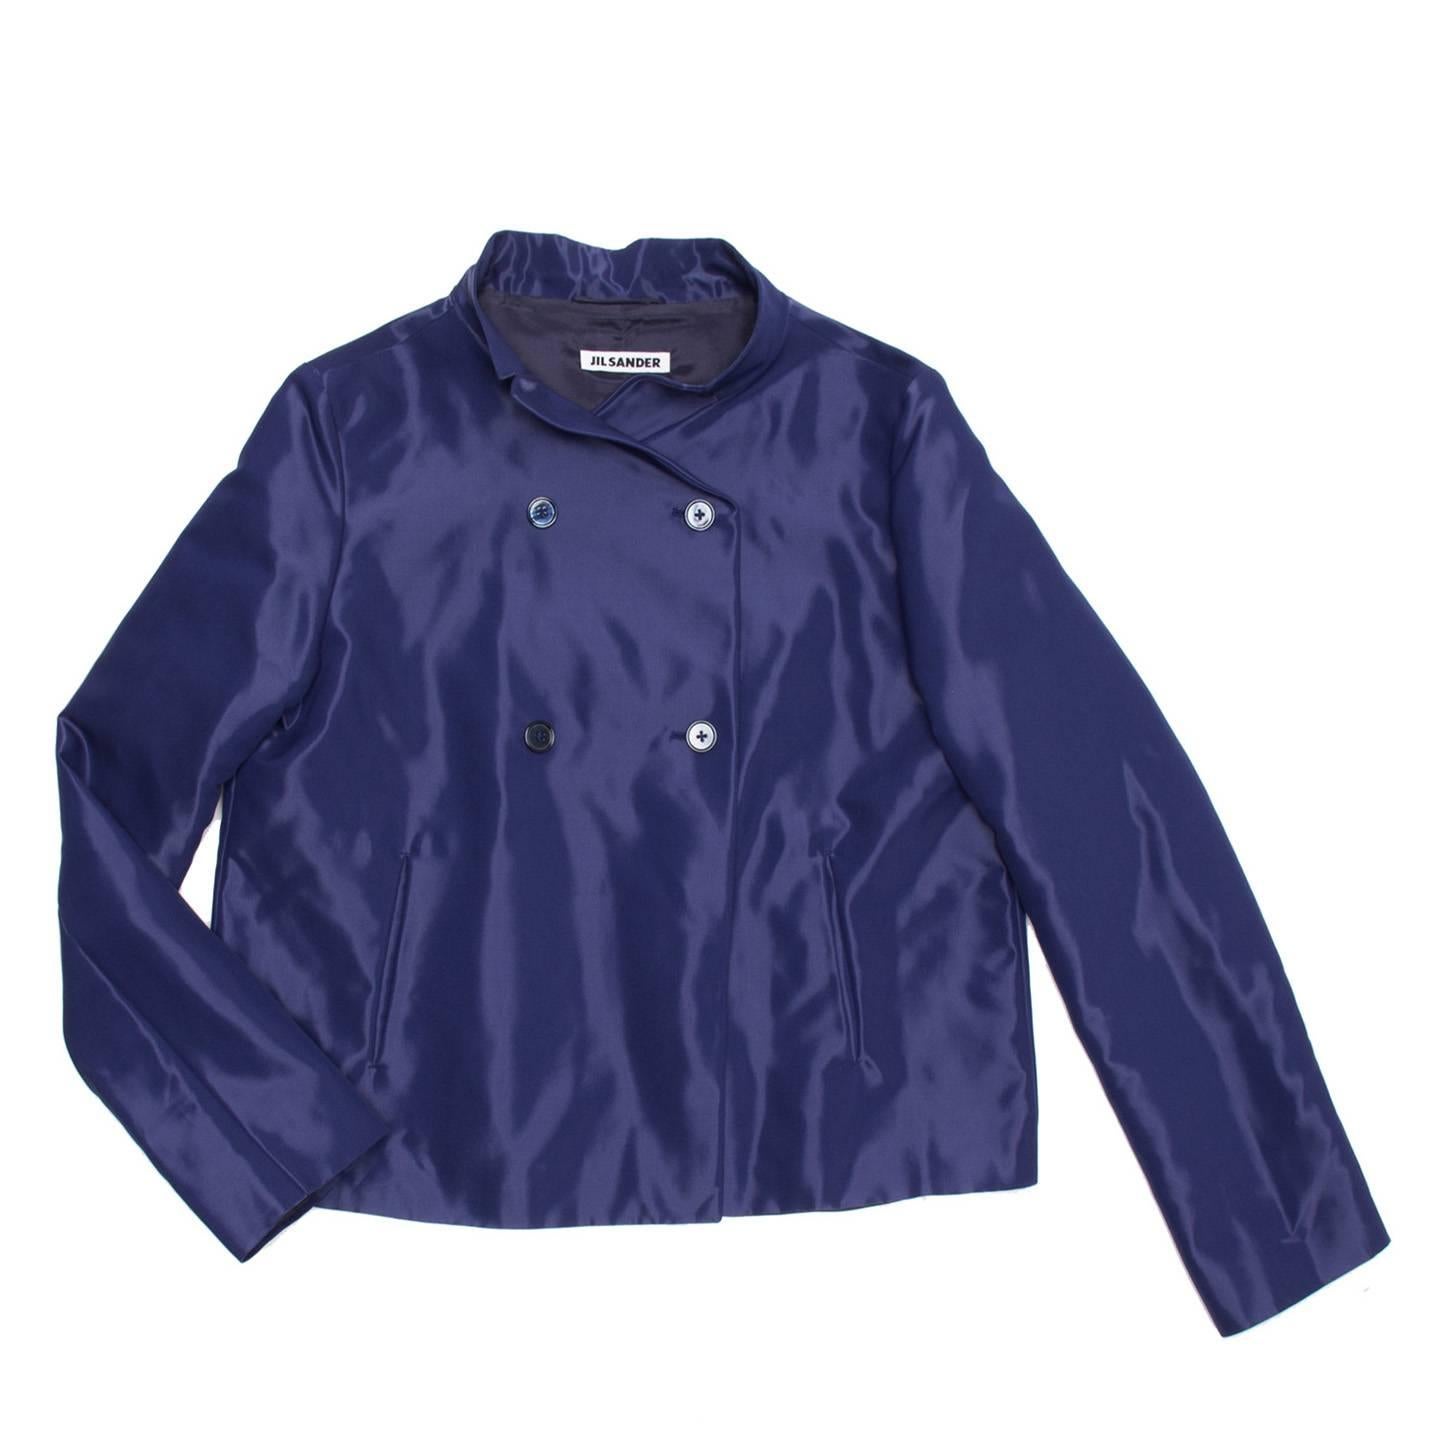 Midnight blue shiny cotton blend cropped jacket with a trapeze fit. The double breast is fastened with little dark blue buttons and the neck has a very small notch collar.

Size  40 French sizing

Condition  Excellent: never worn